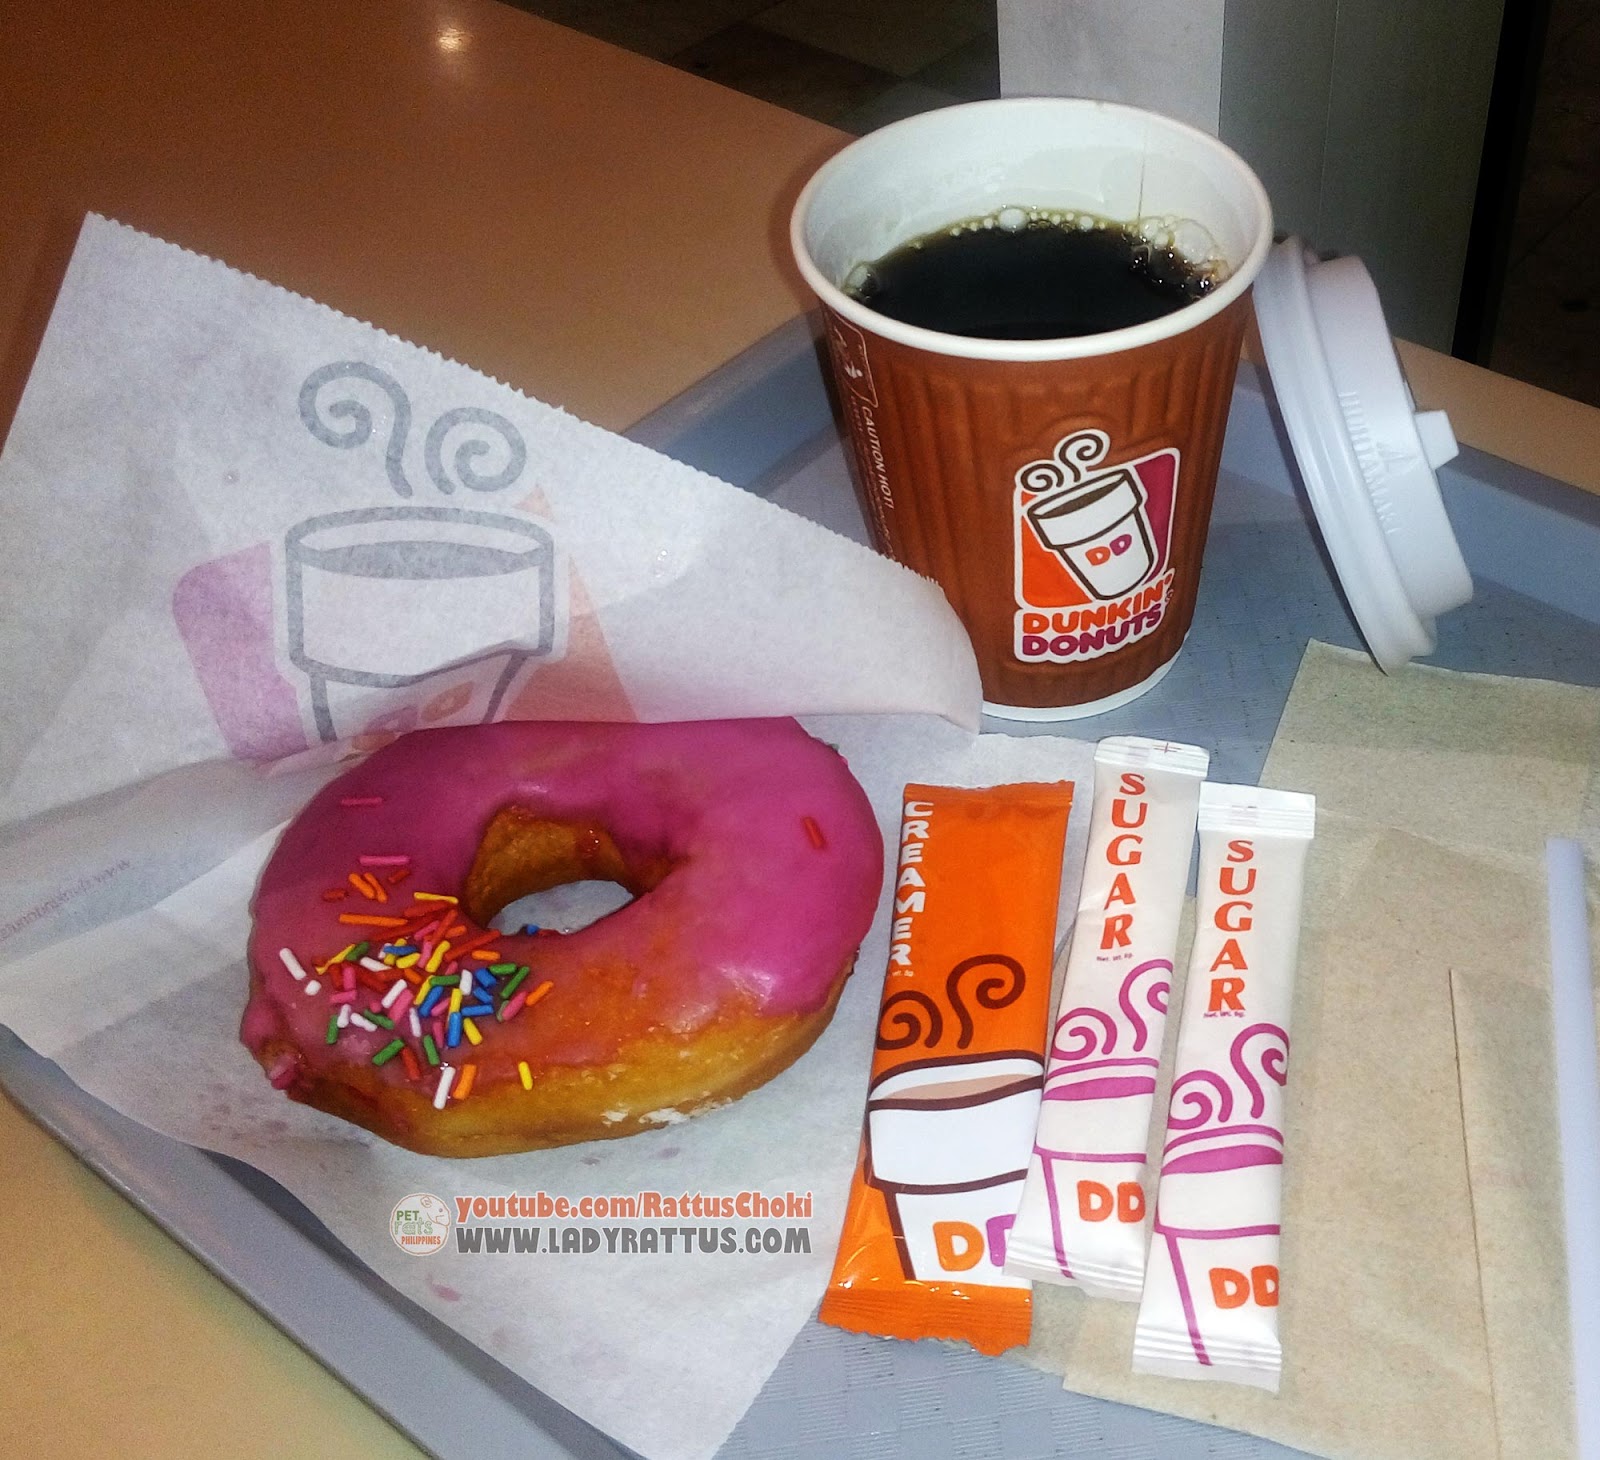 Free donuts with Dunkin Donuts' Coffee Combo